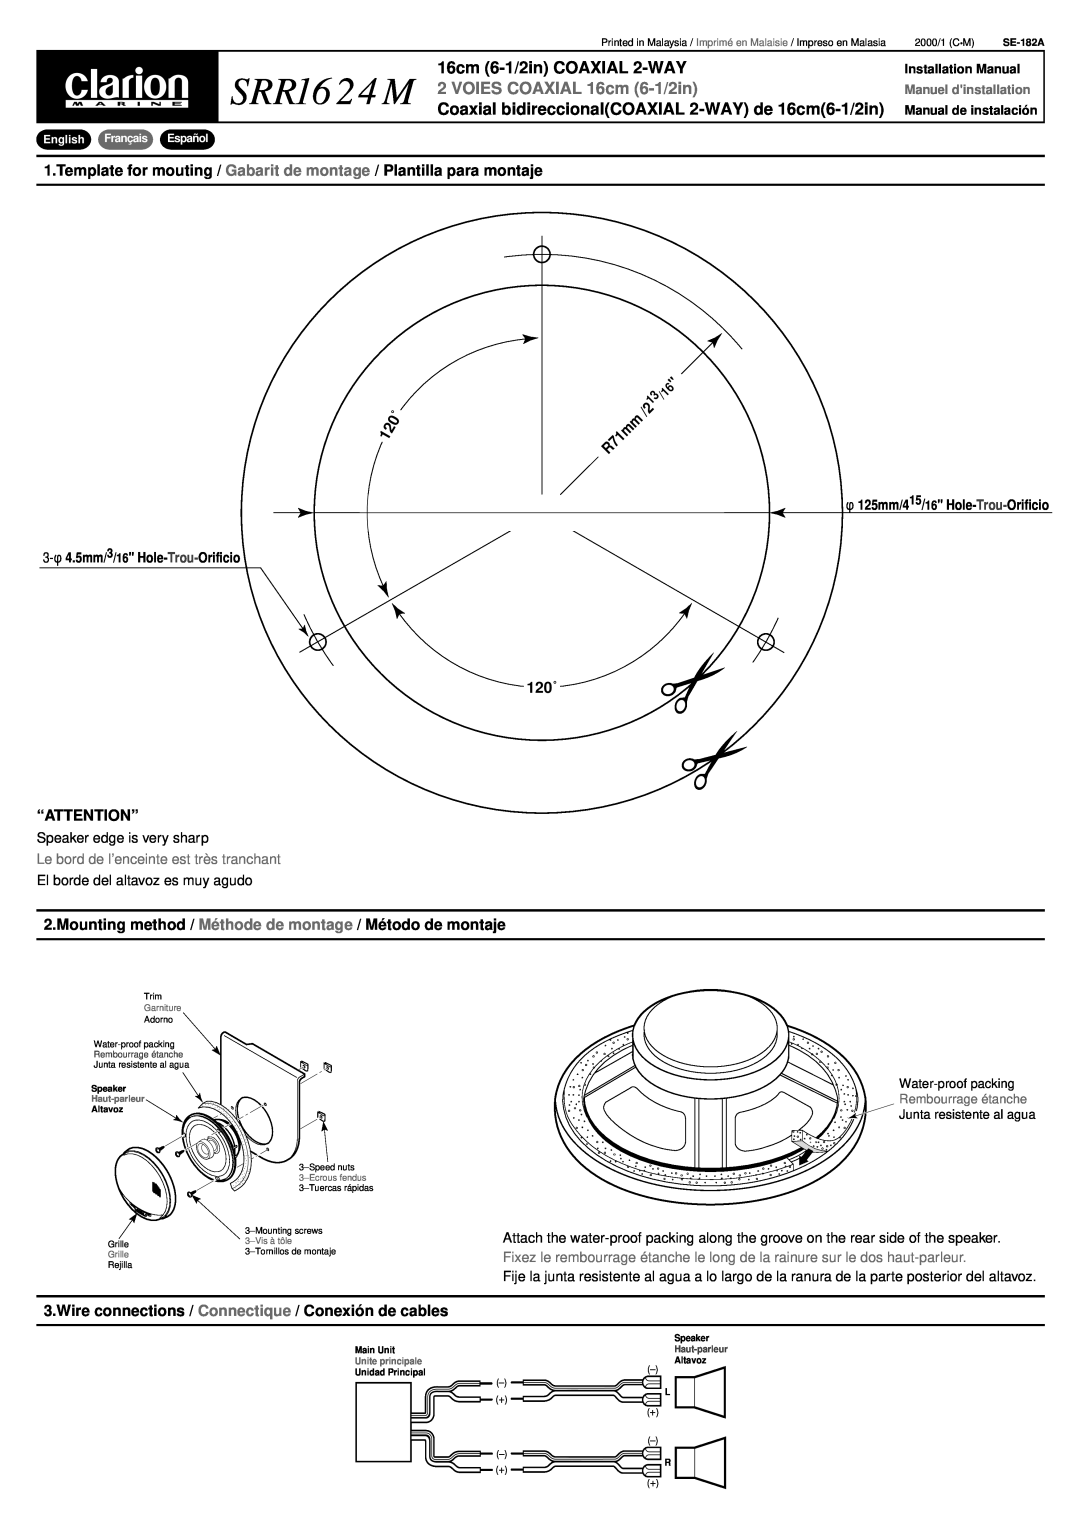 Clarion SRR1624M installation manual 16cm 6-1/2inCOAXIAL 2-WAY, VOIES COAXIAL 16cm 6-1/2in 